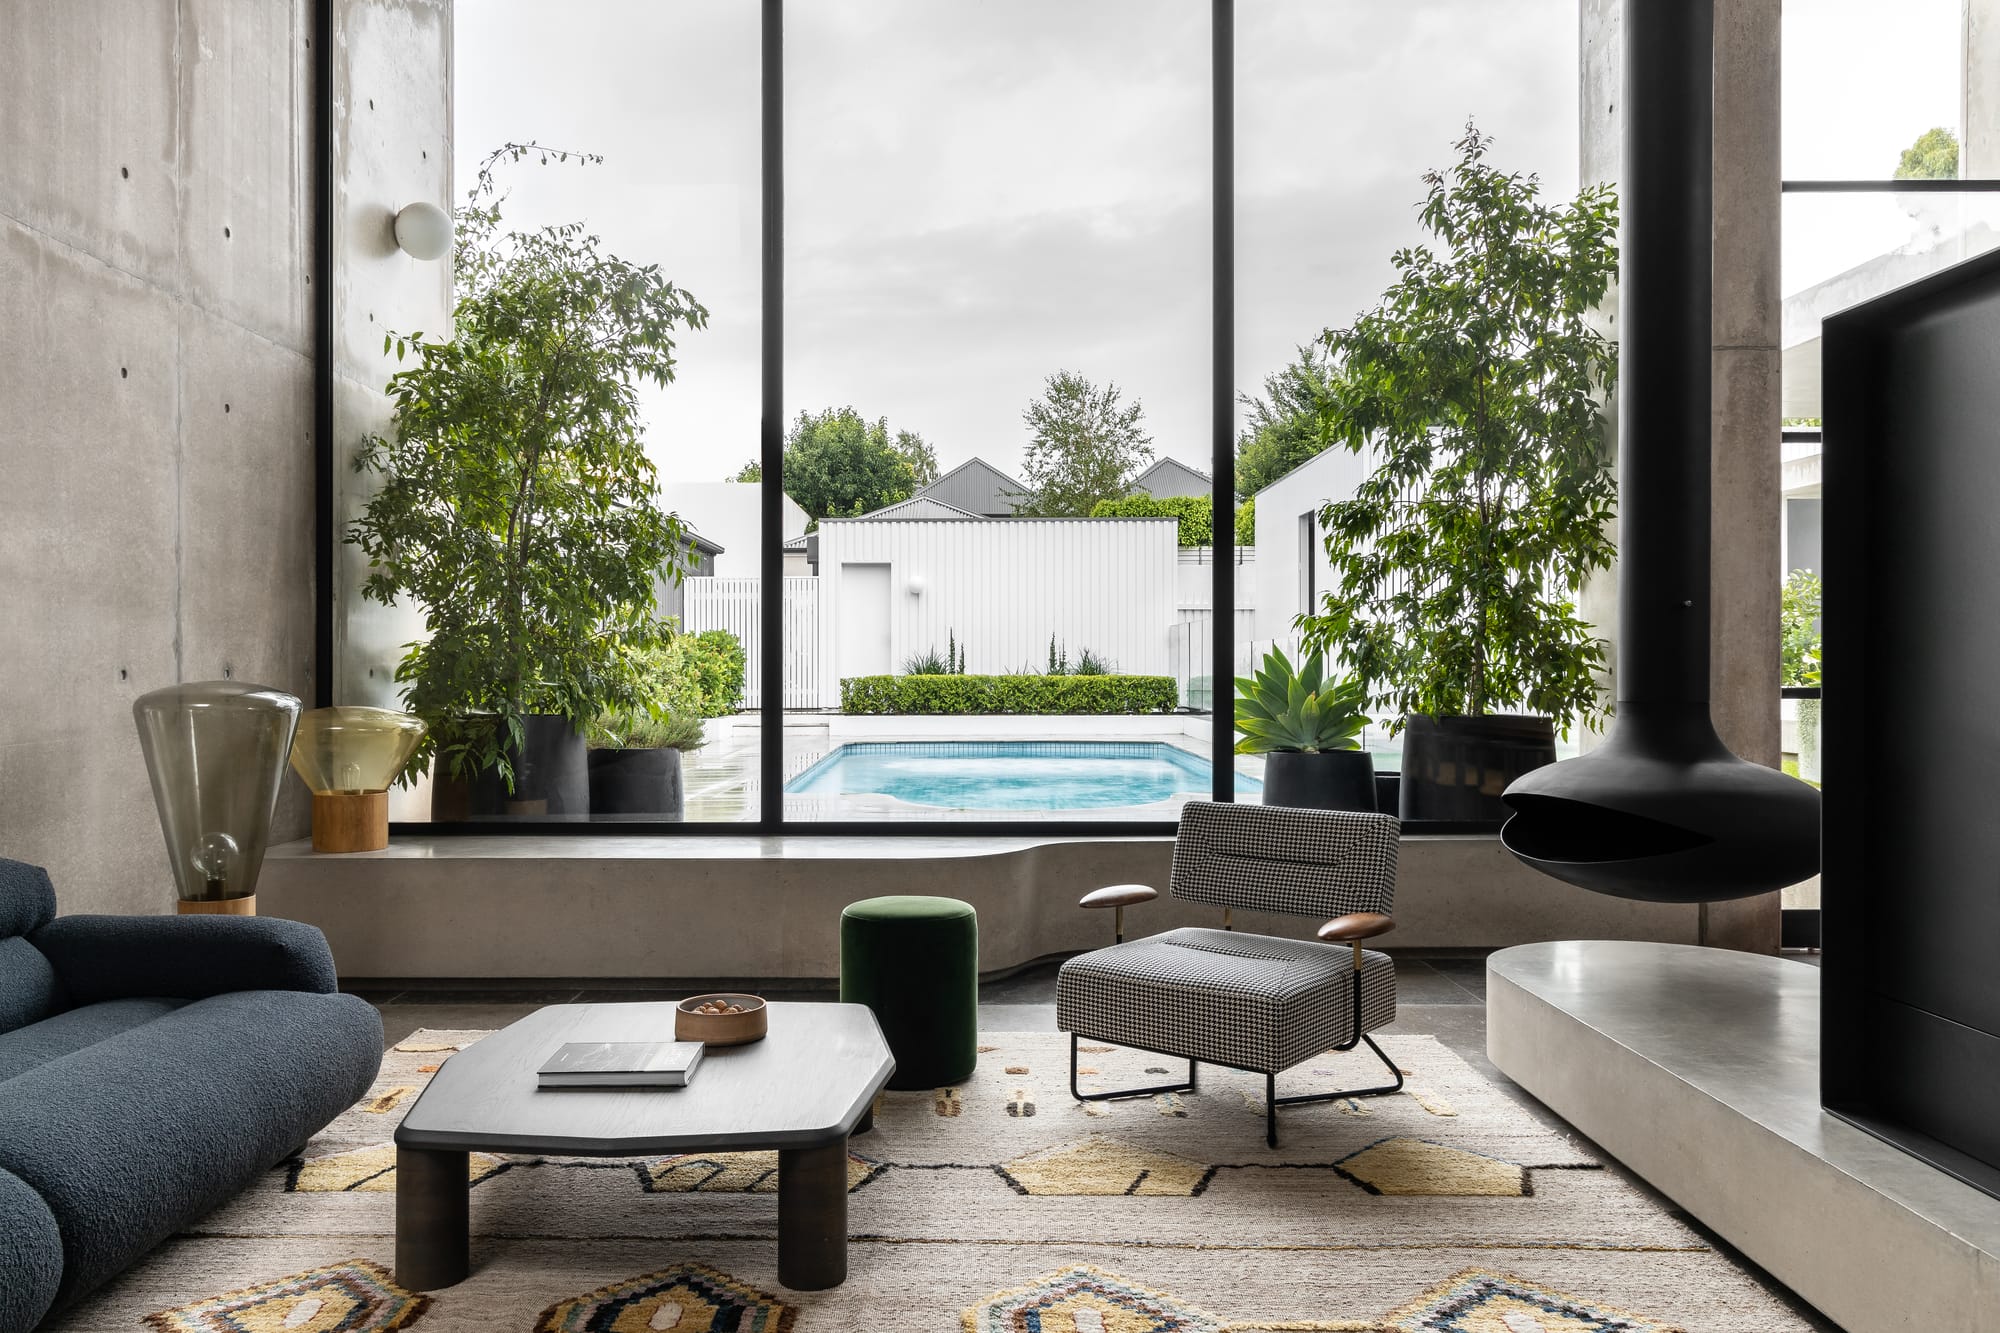 Rose Park by studio gram. Photography by Timothy Ross. Living room with Aztec print rug and floor-to-ceiling black framed windows overlooking garden and pool. Black dome fireplace hanging from ceiling. Concrete bench running along window. 